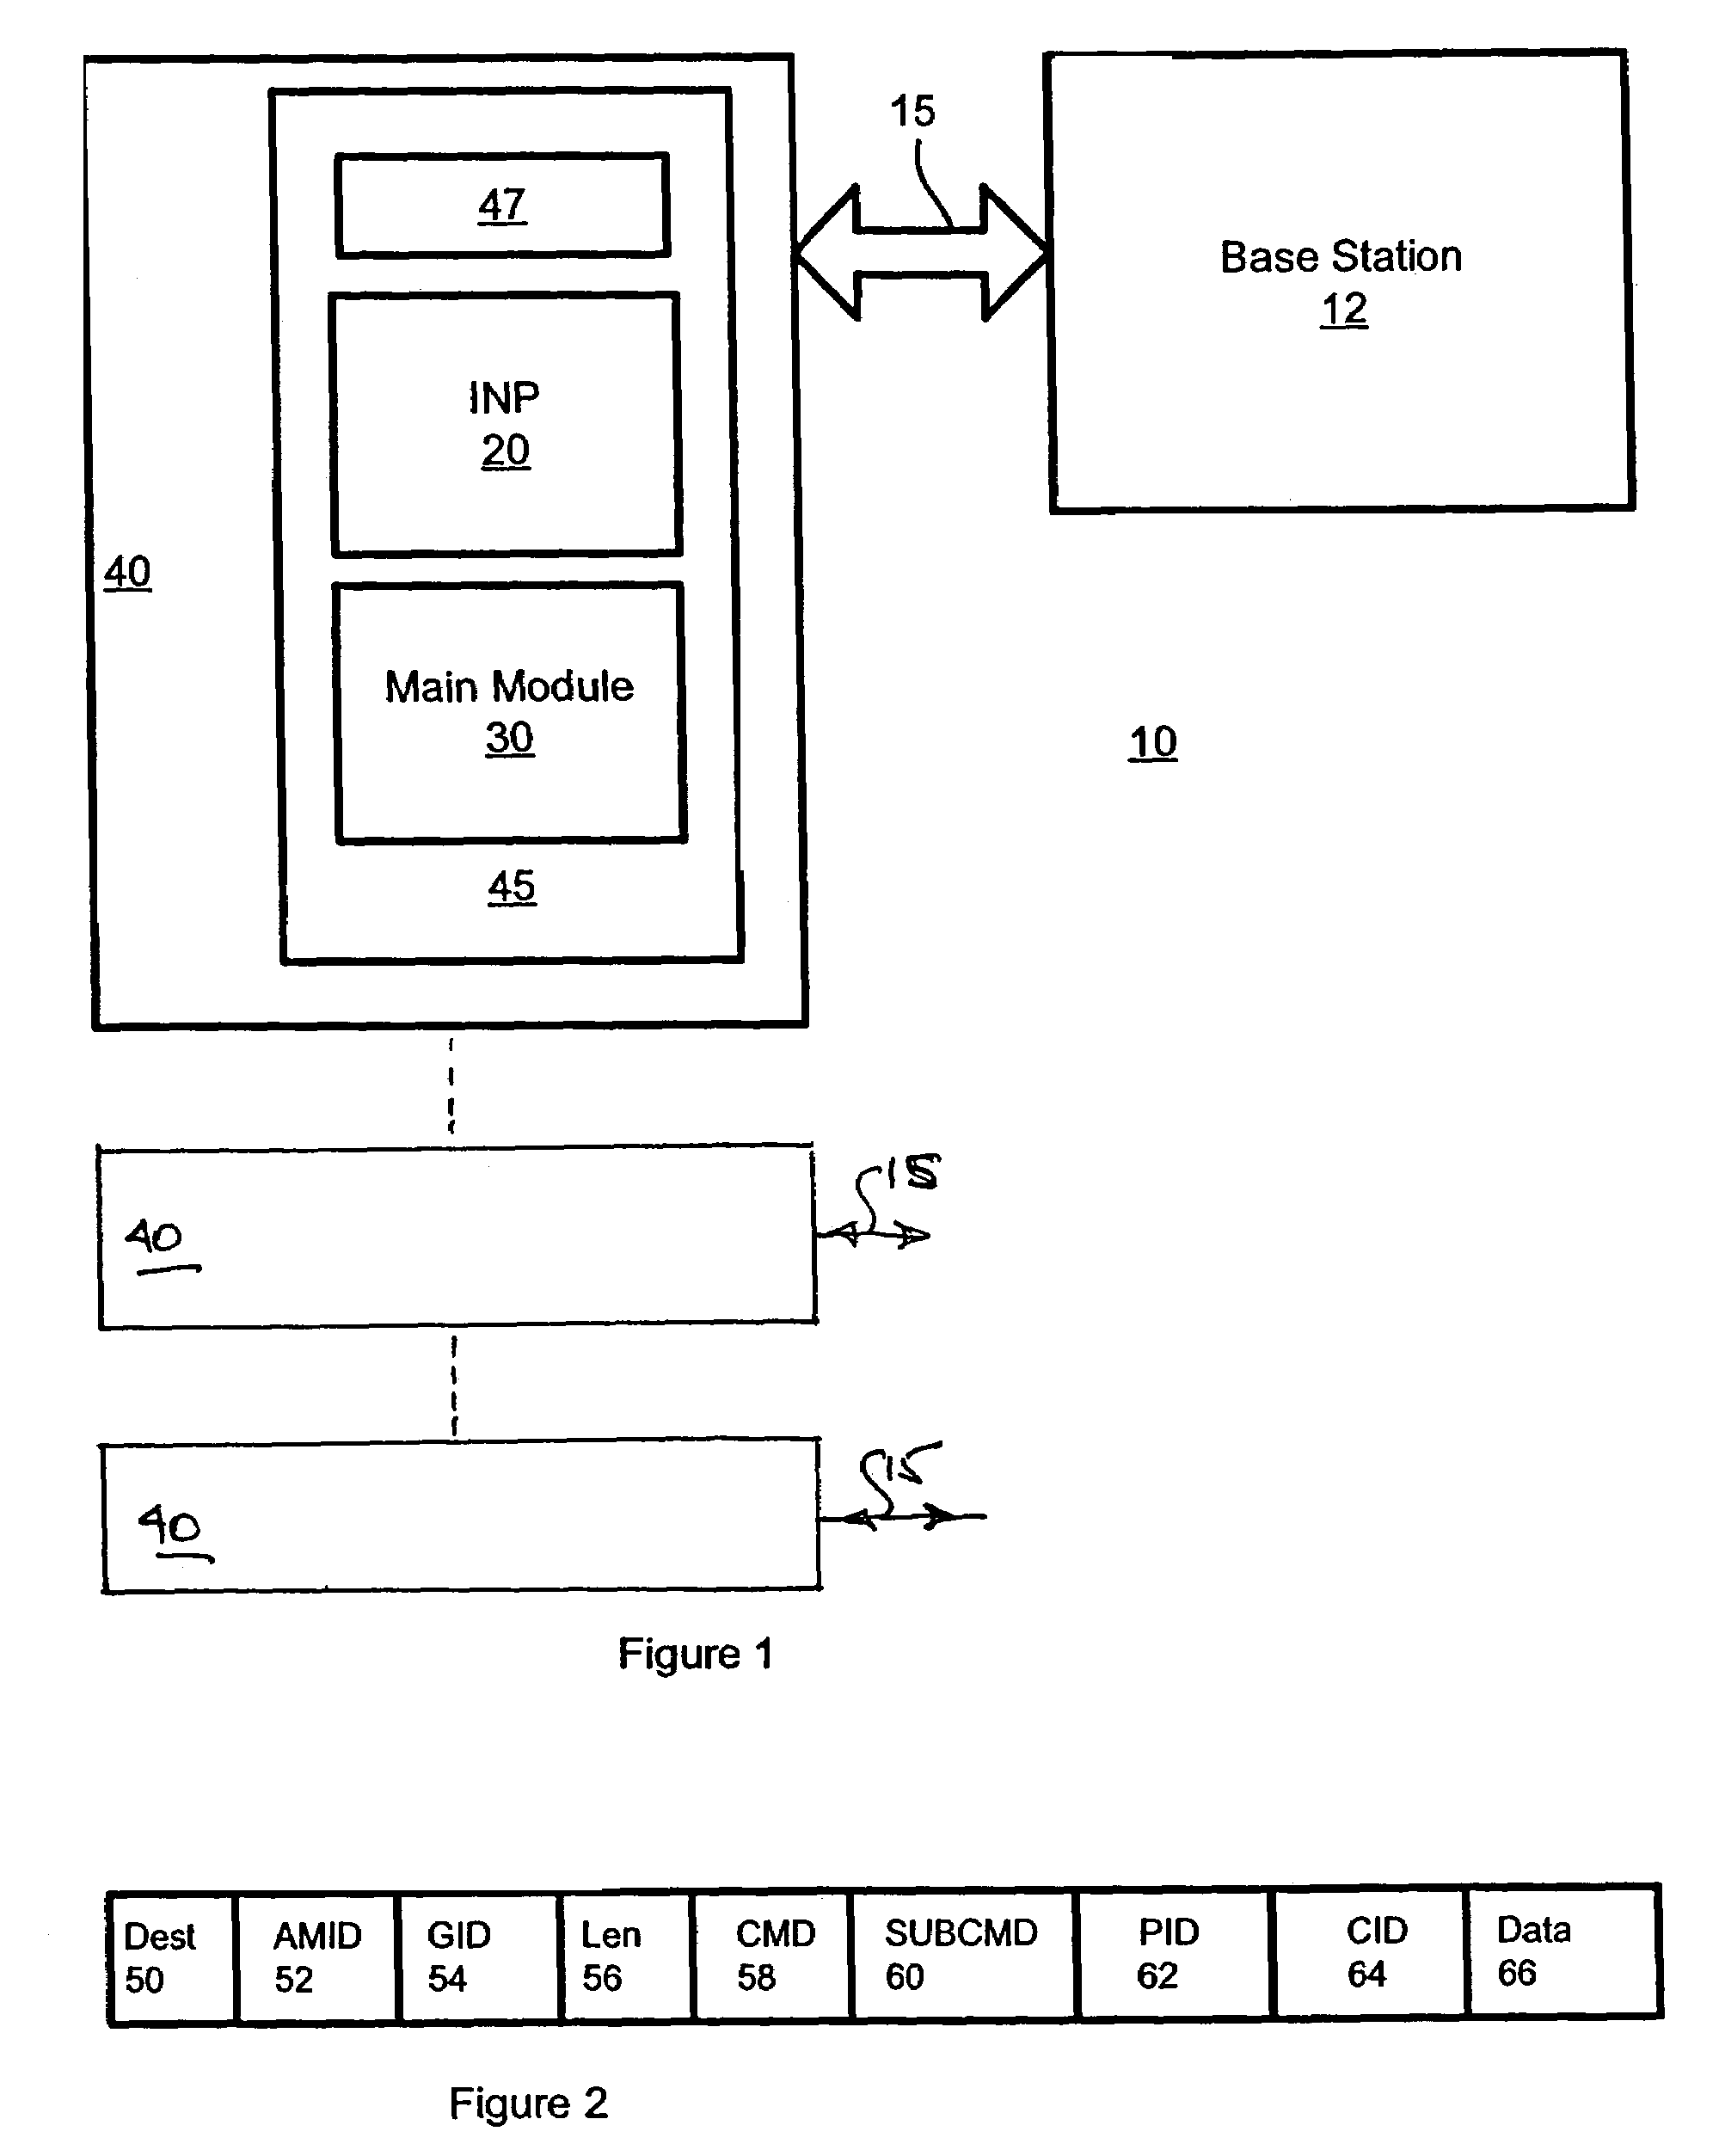 System and method for updating a network of remote sensors